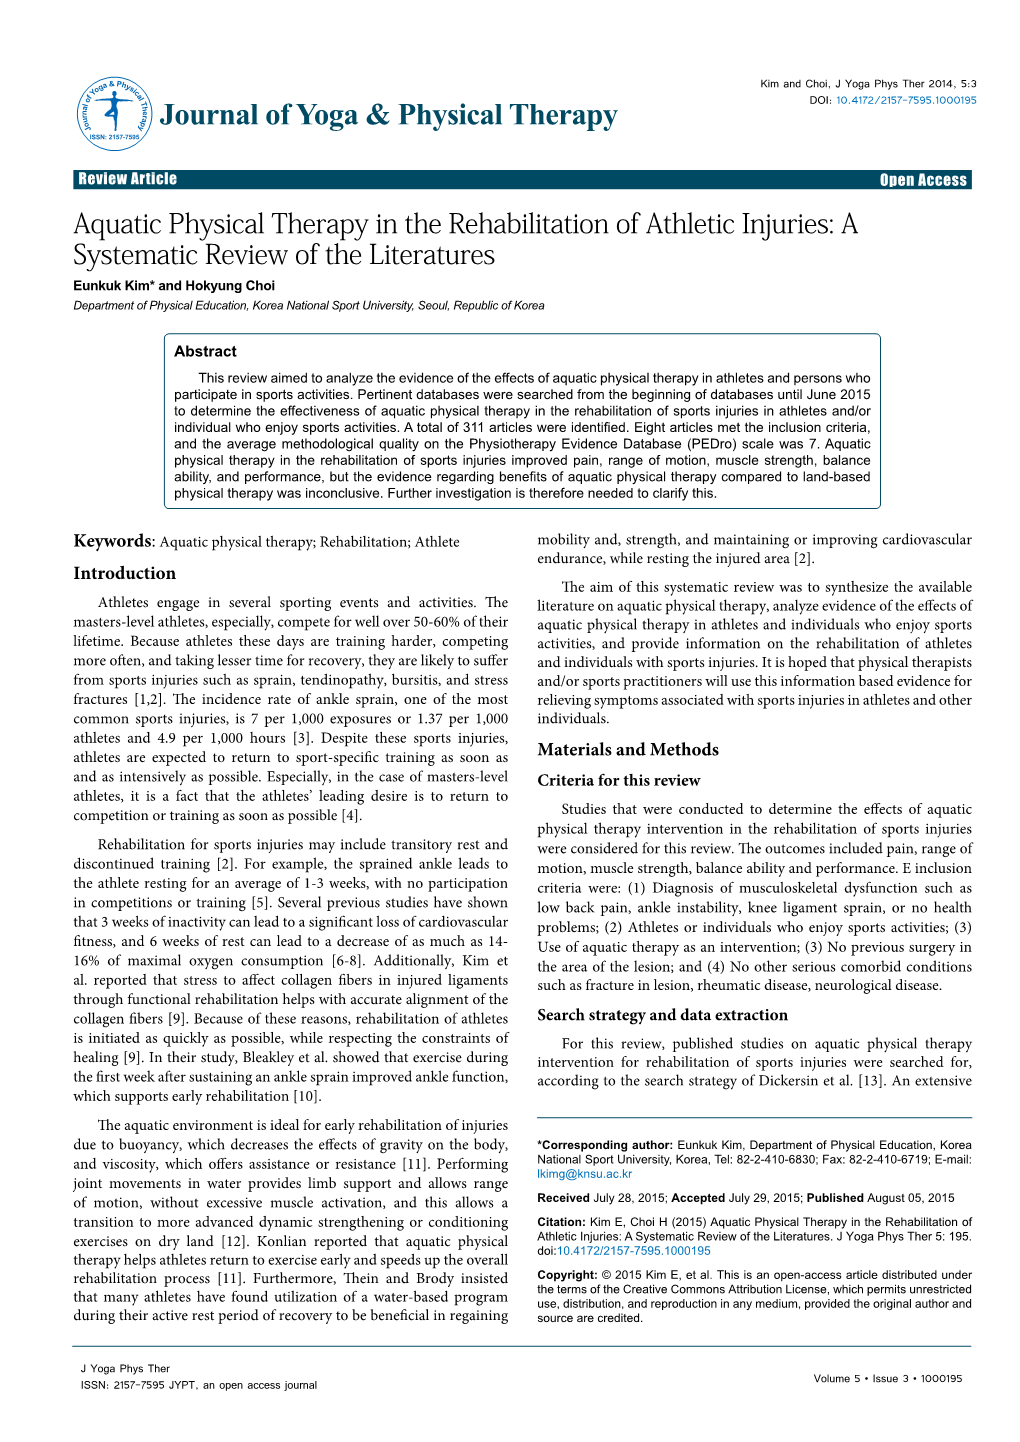 Aquatic Physical Therapy in the Rehabilitation of Athletic Injuries: A